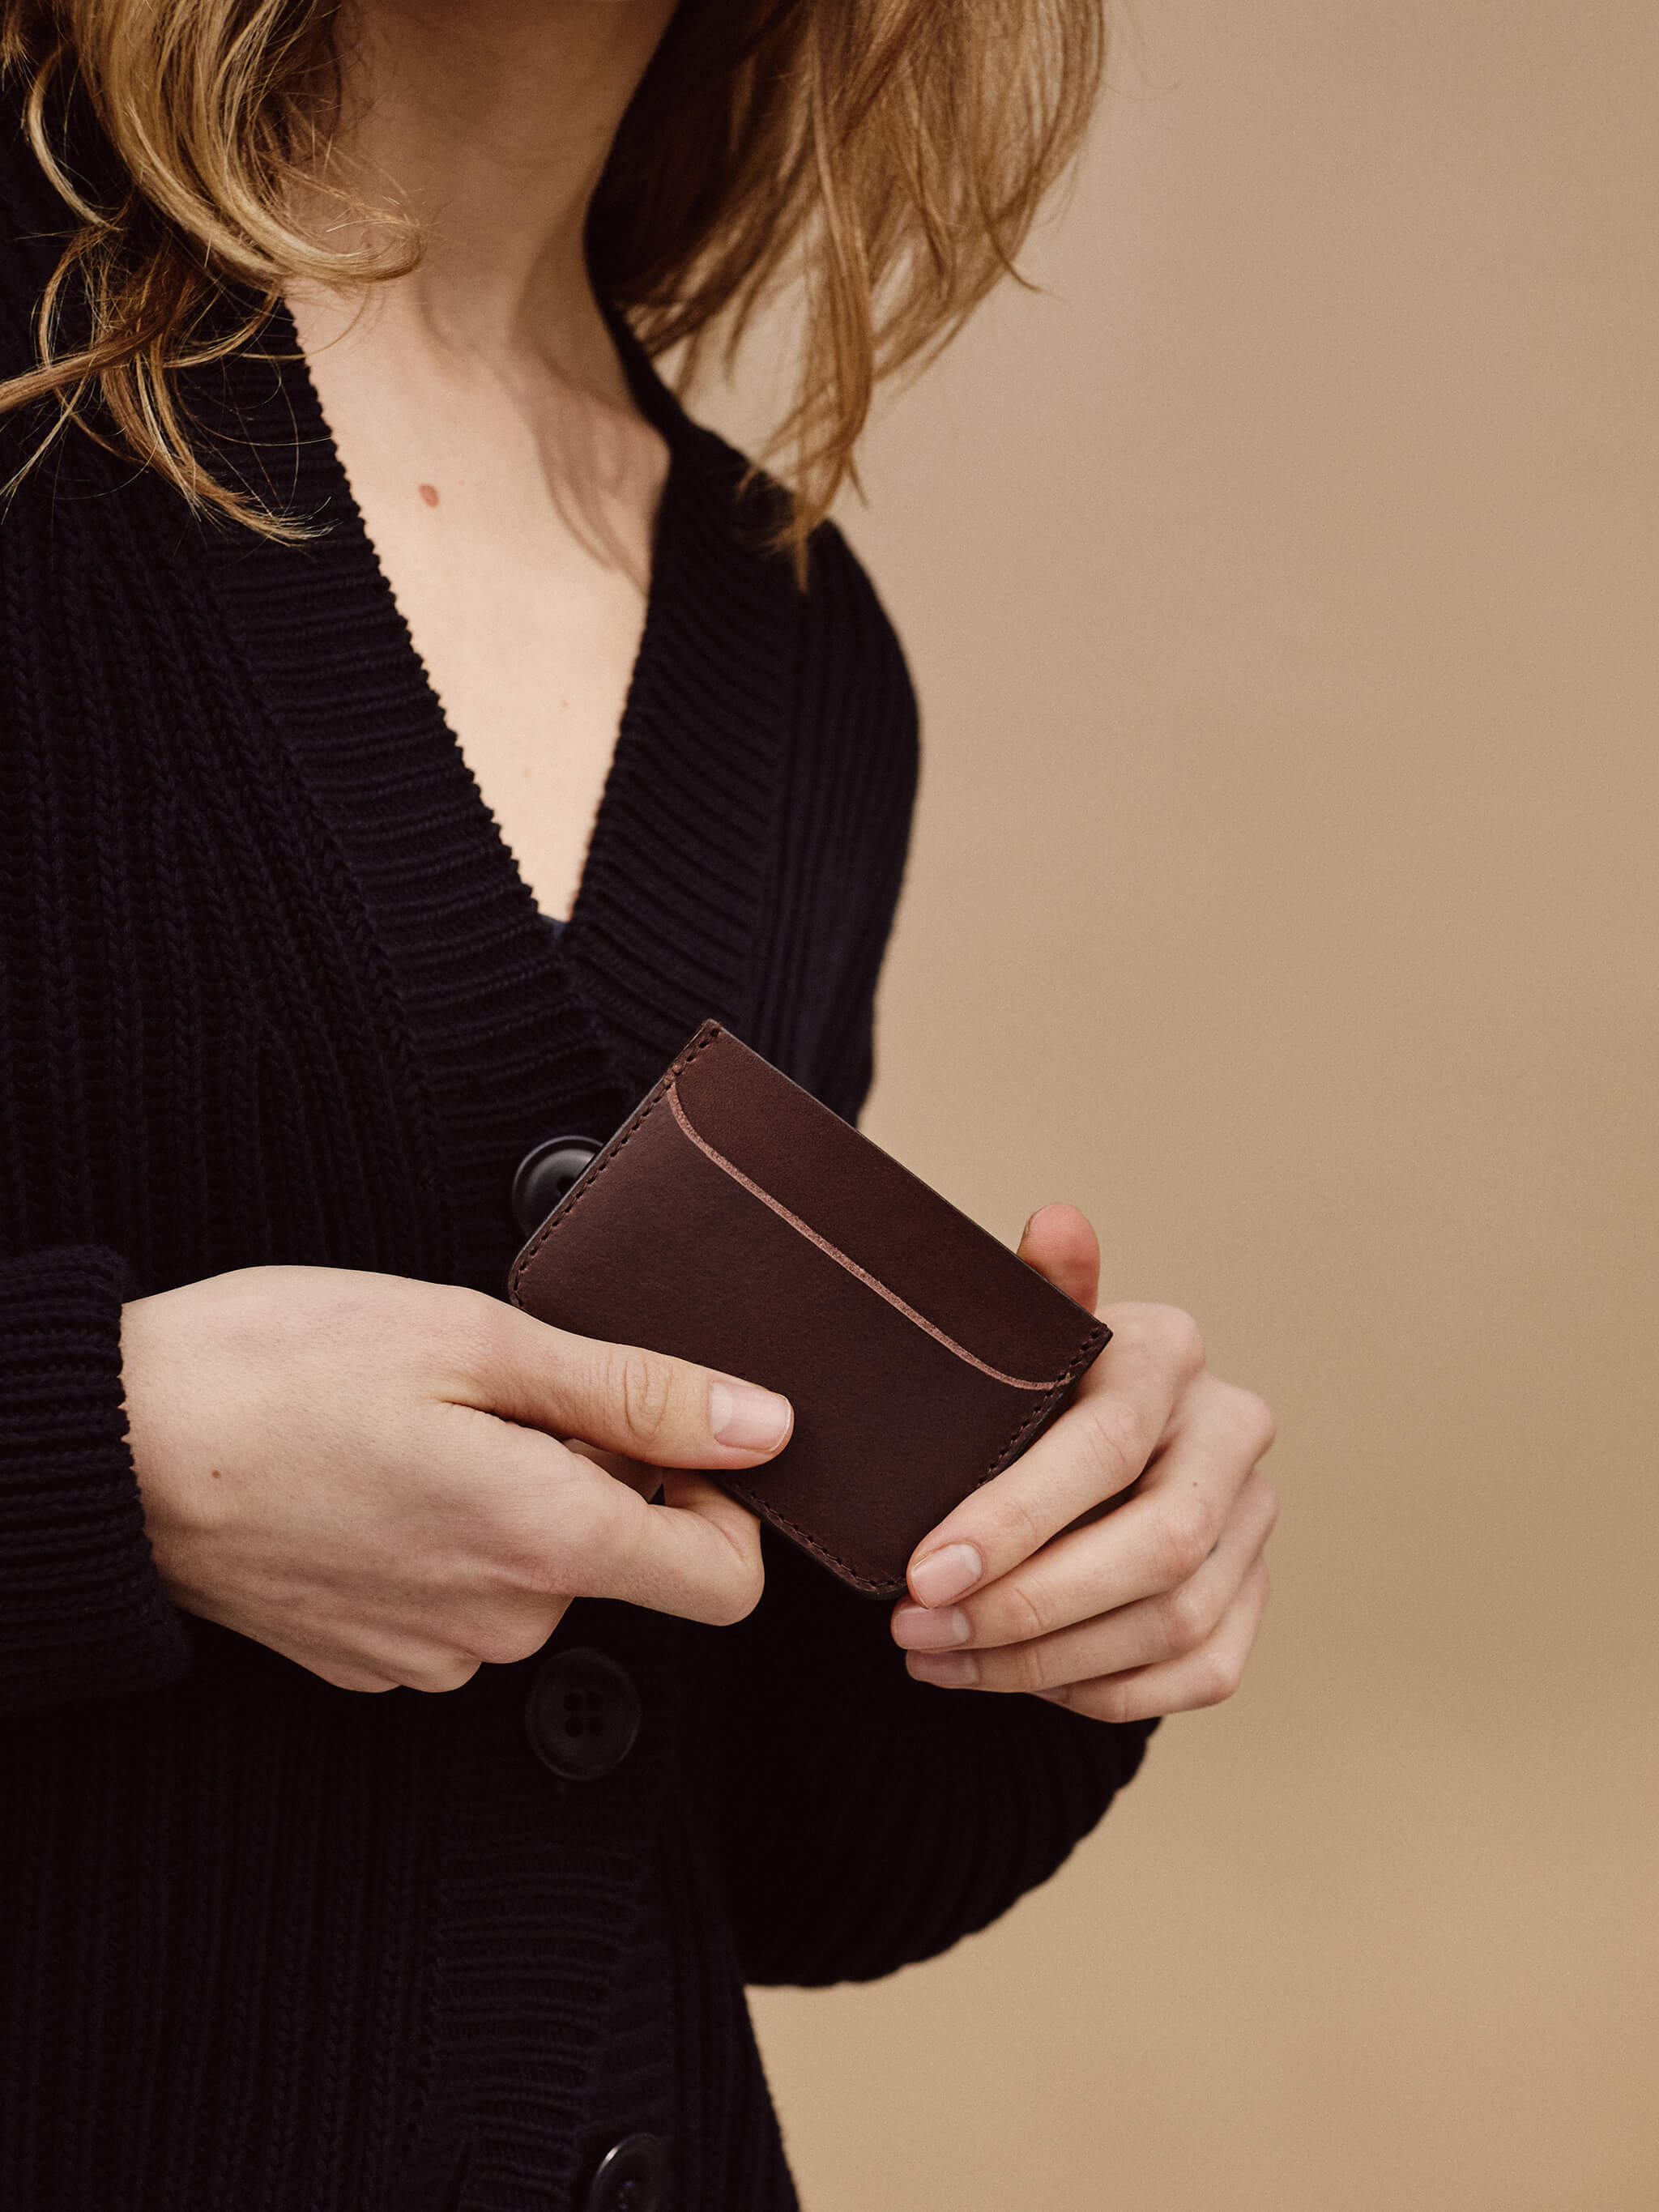 Socon Crafted Leather Cardholder - Chocolate